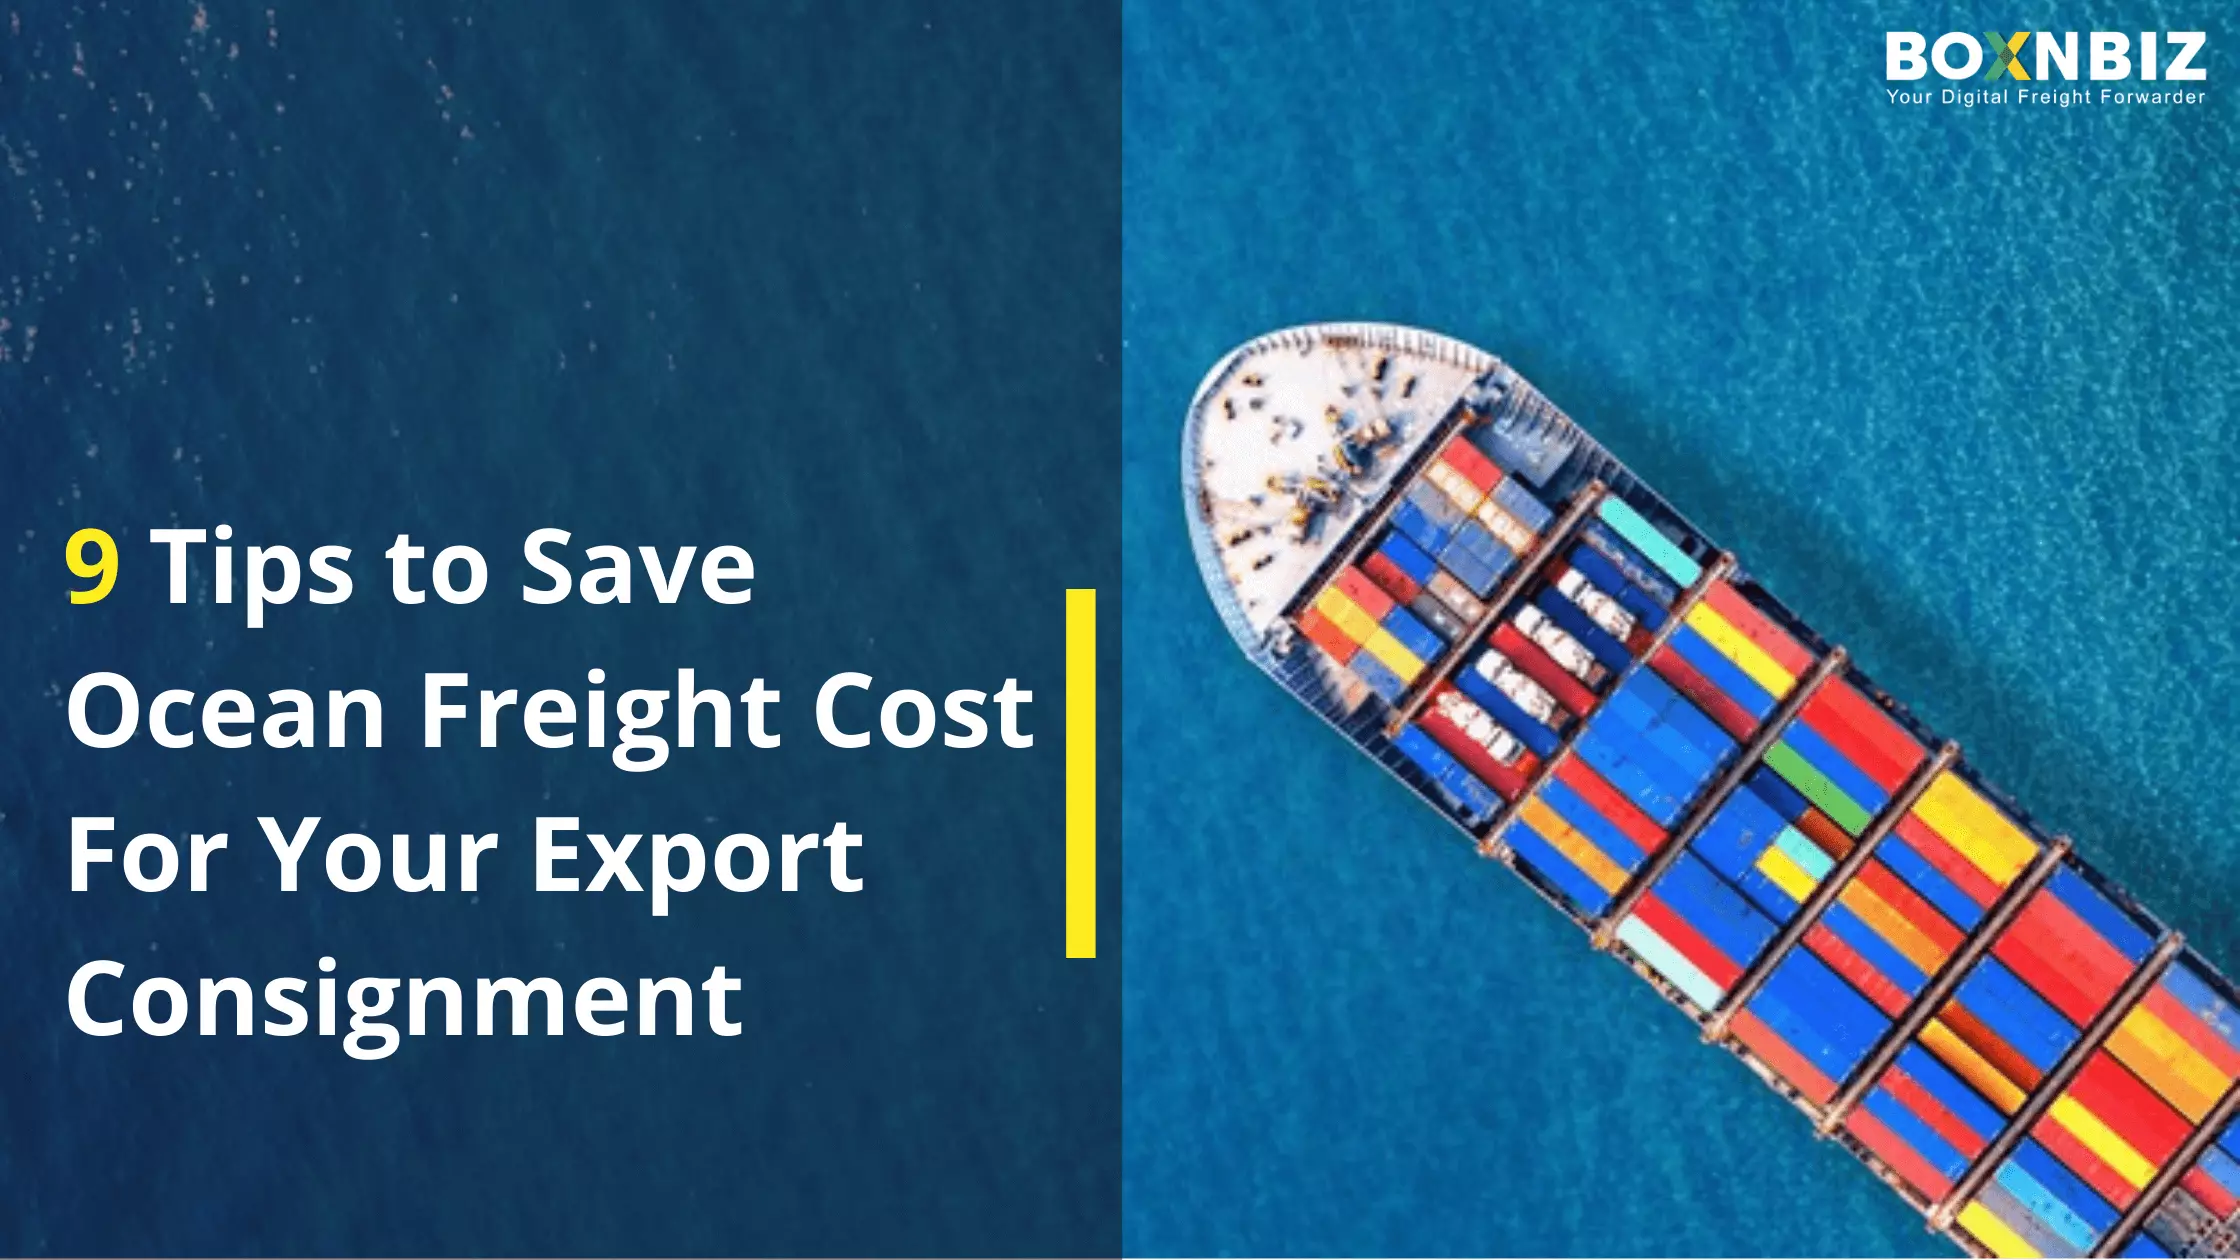 Top 9 Tips To Save Ocean Freight Cost For Your Next Export Consignment